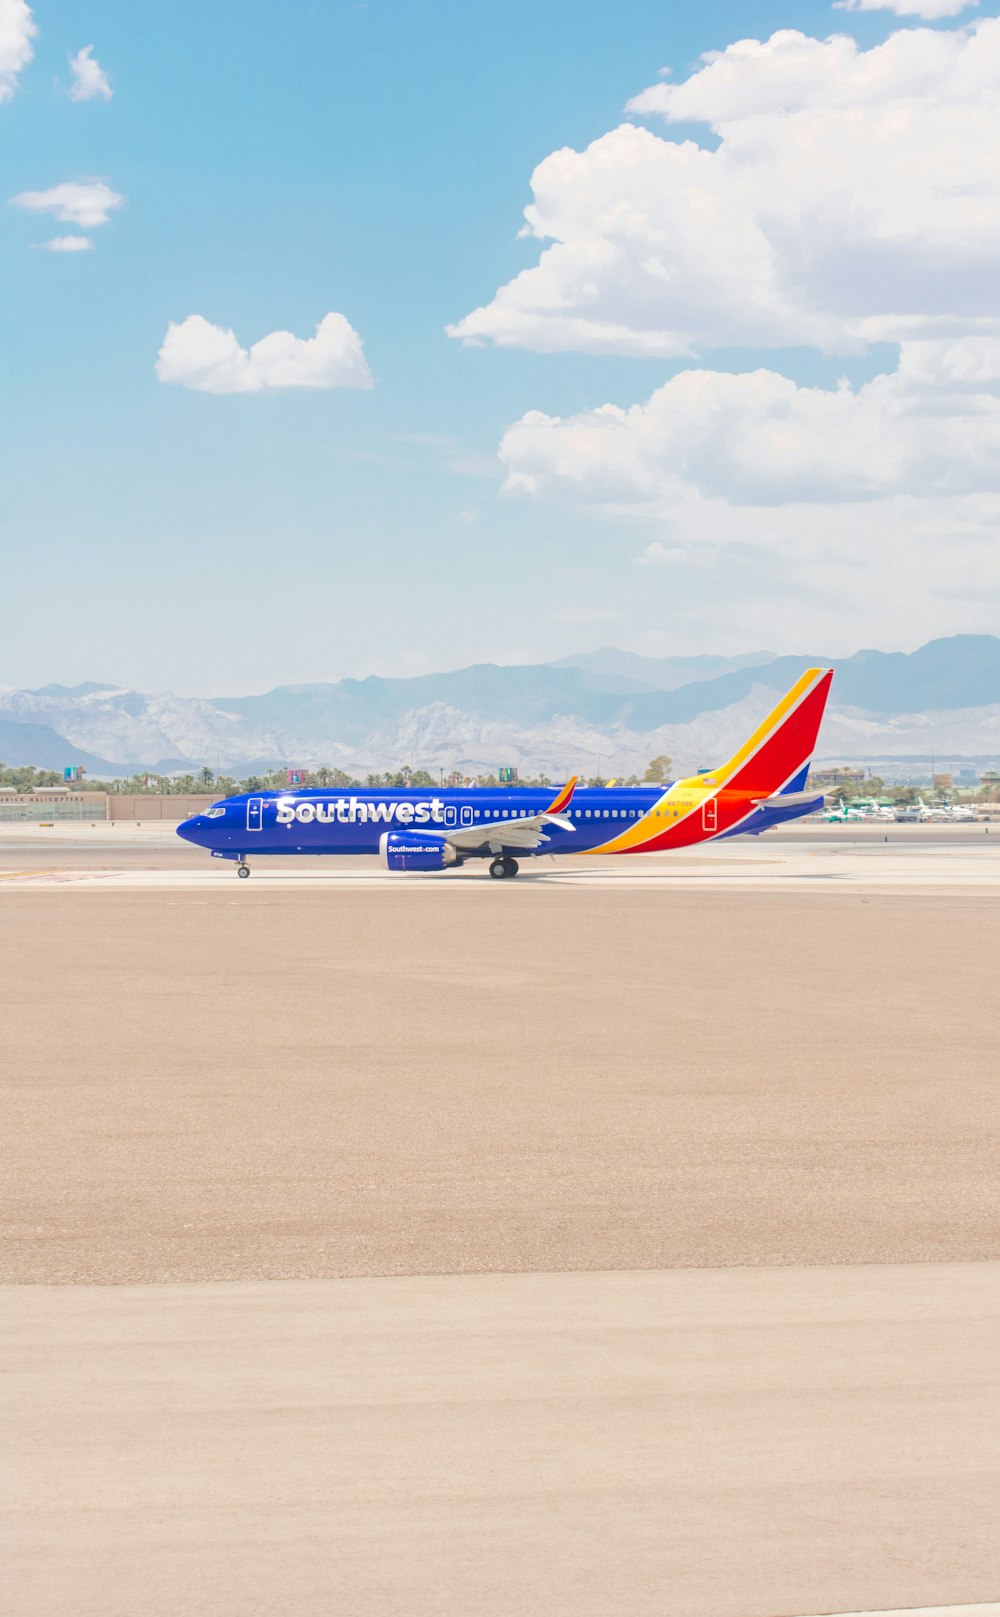 a southwest airlines plane on the runway at an airport